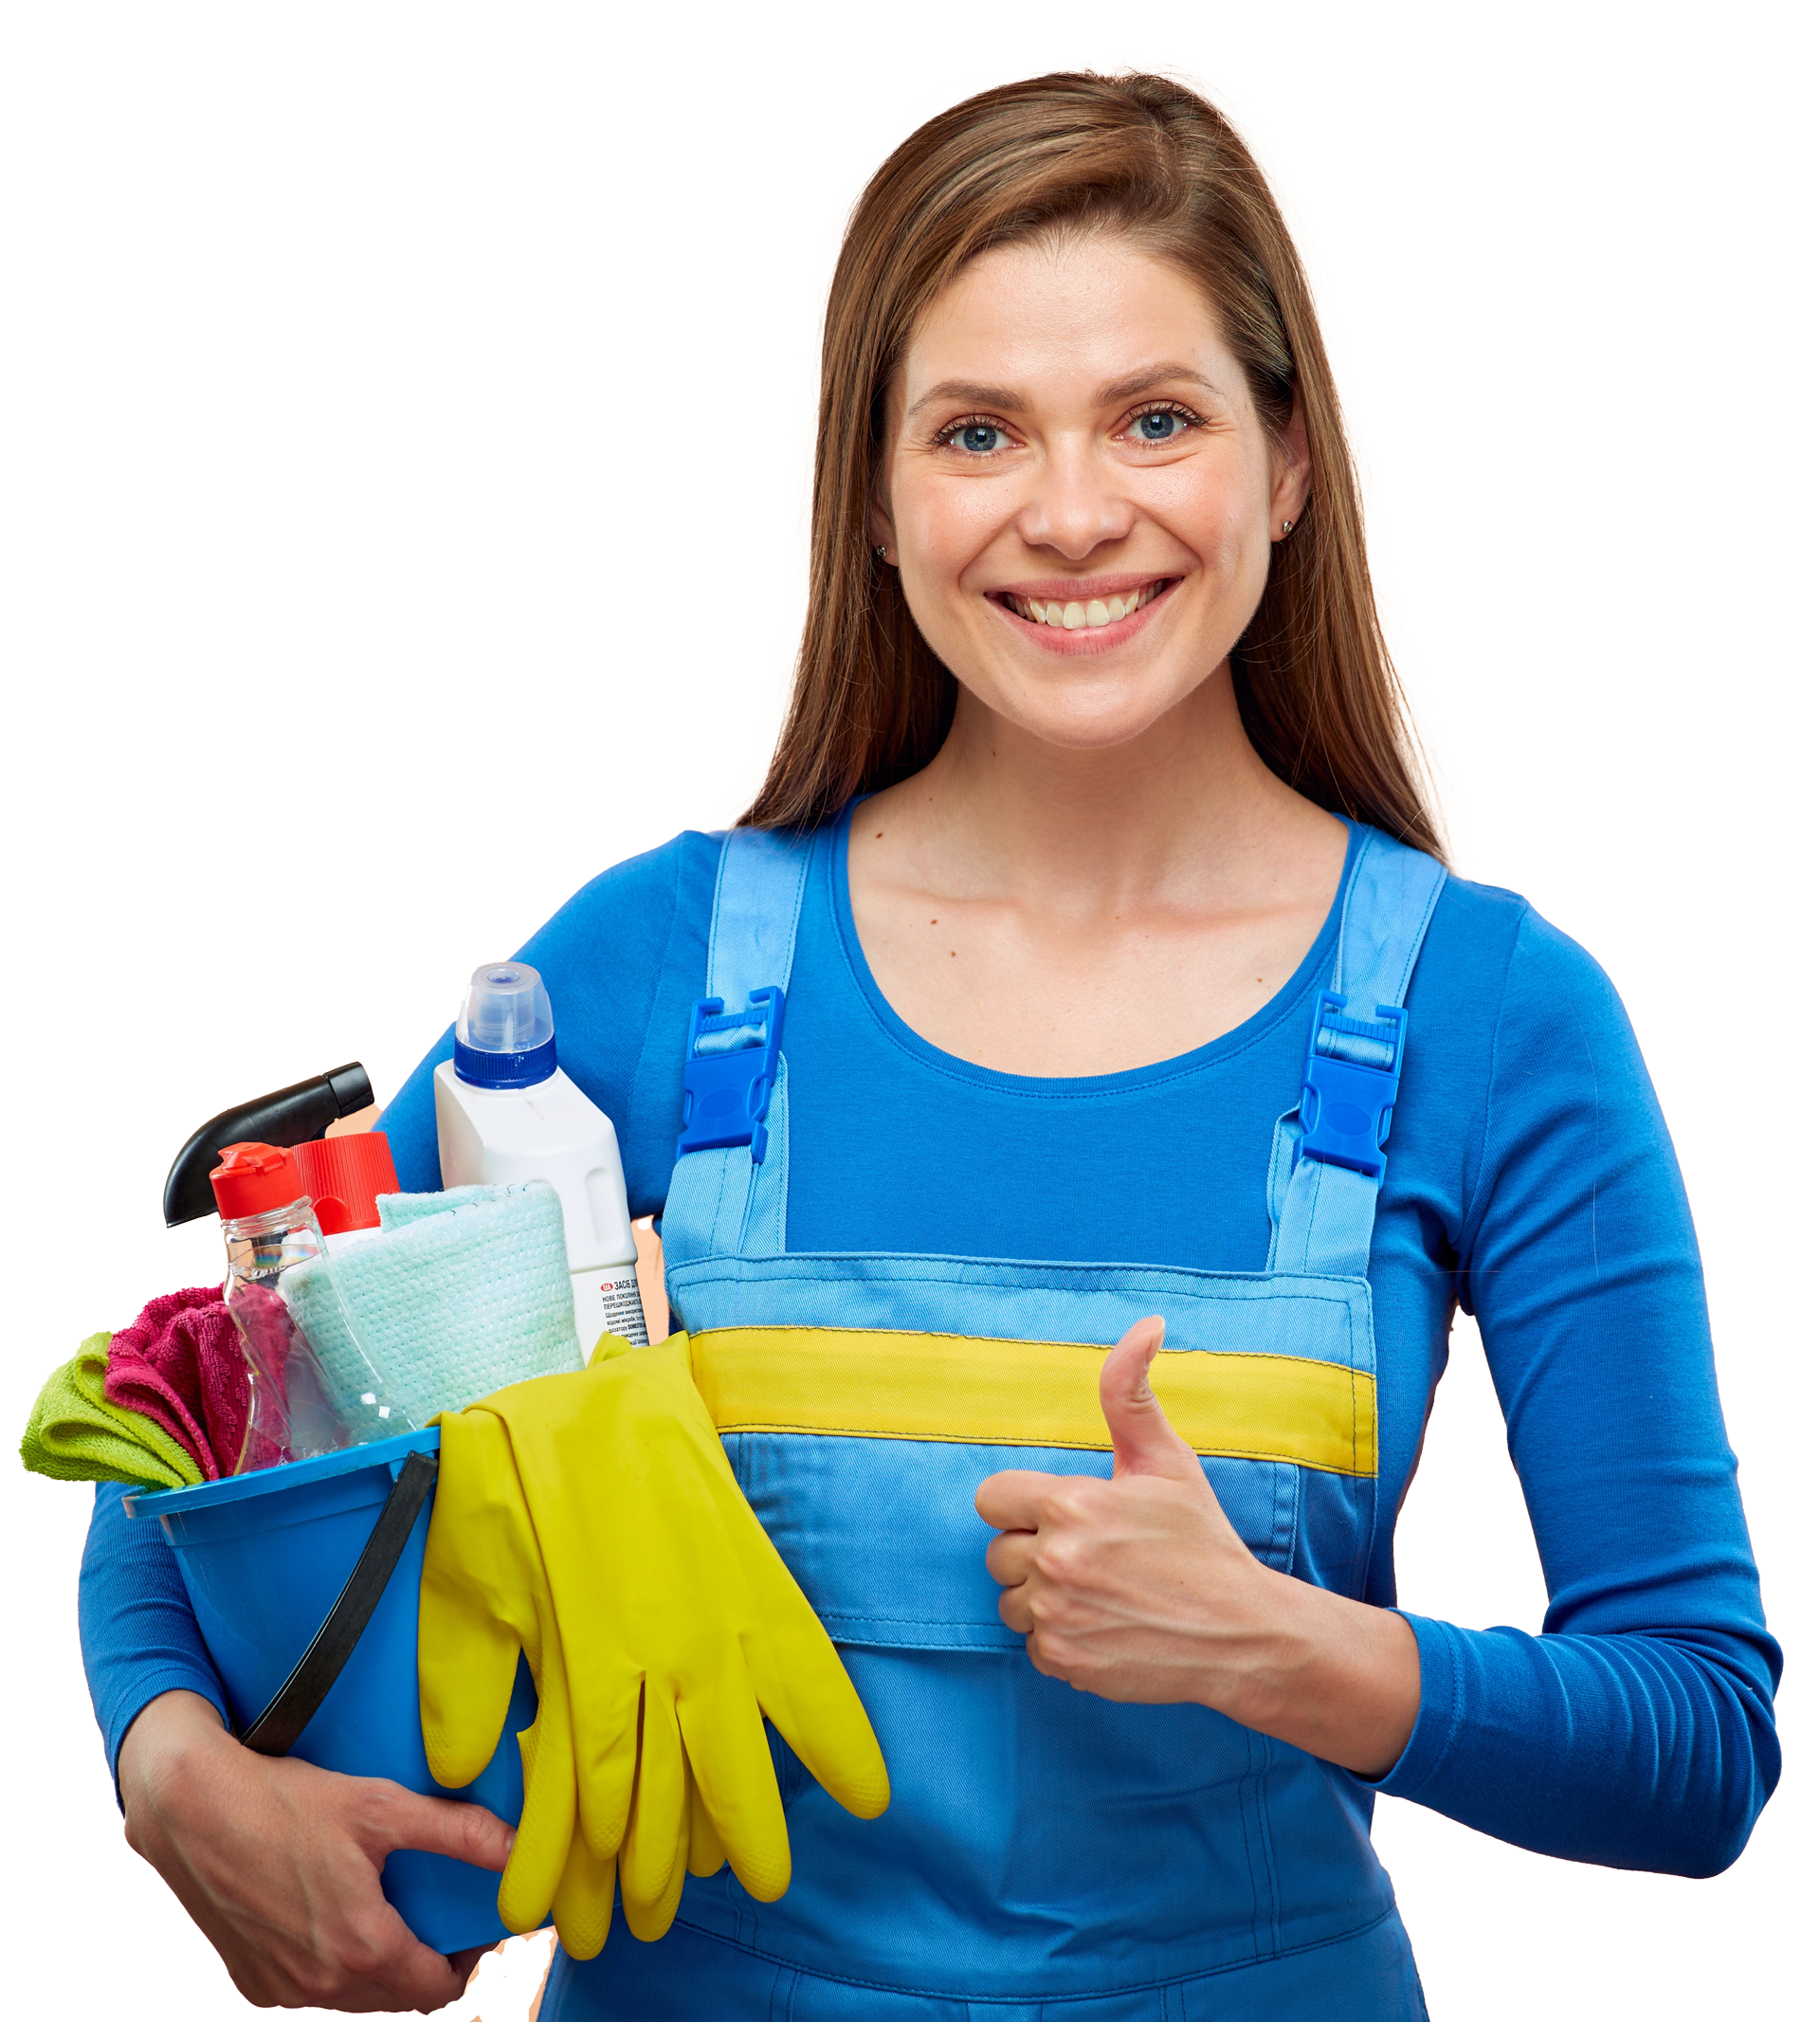 A woman is holding a bucket of cleaning supplies and giving a thumbs up